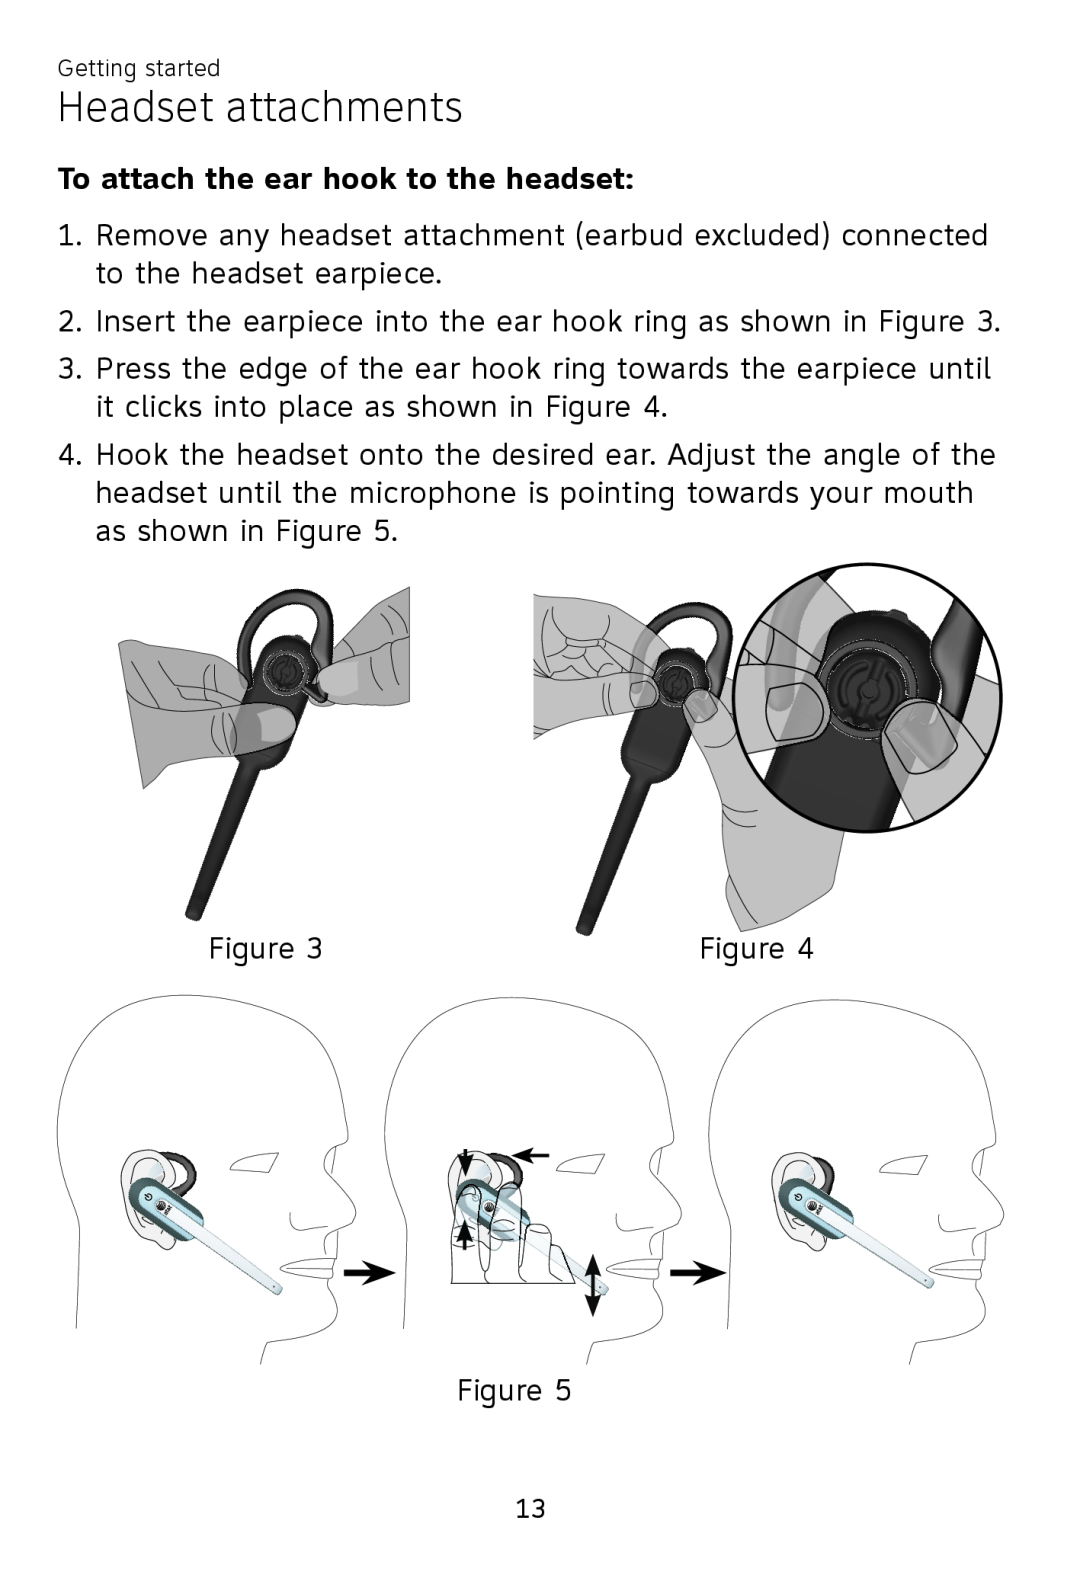 AT&T TL7700 user manual To attach the ear hook to the headset, Headset attachments 